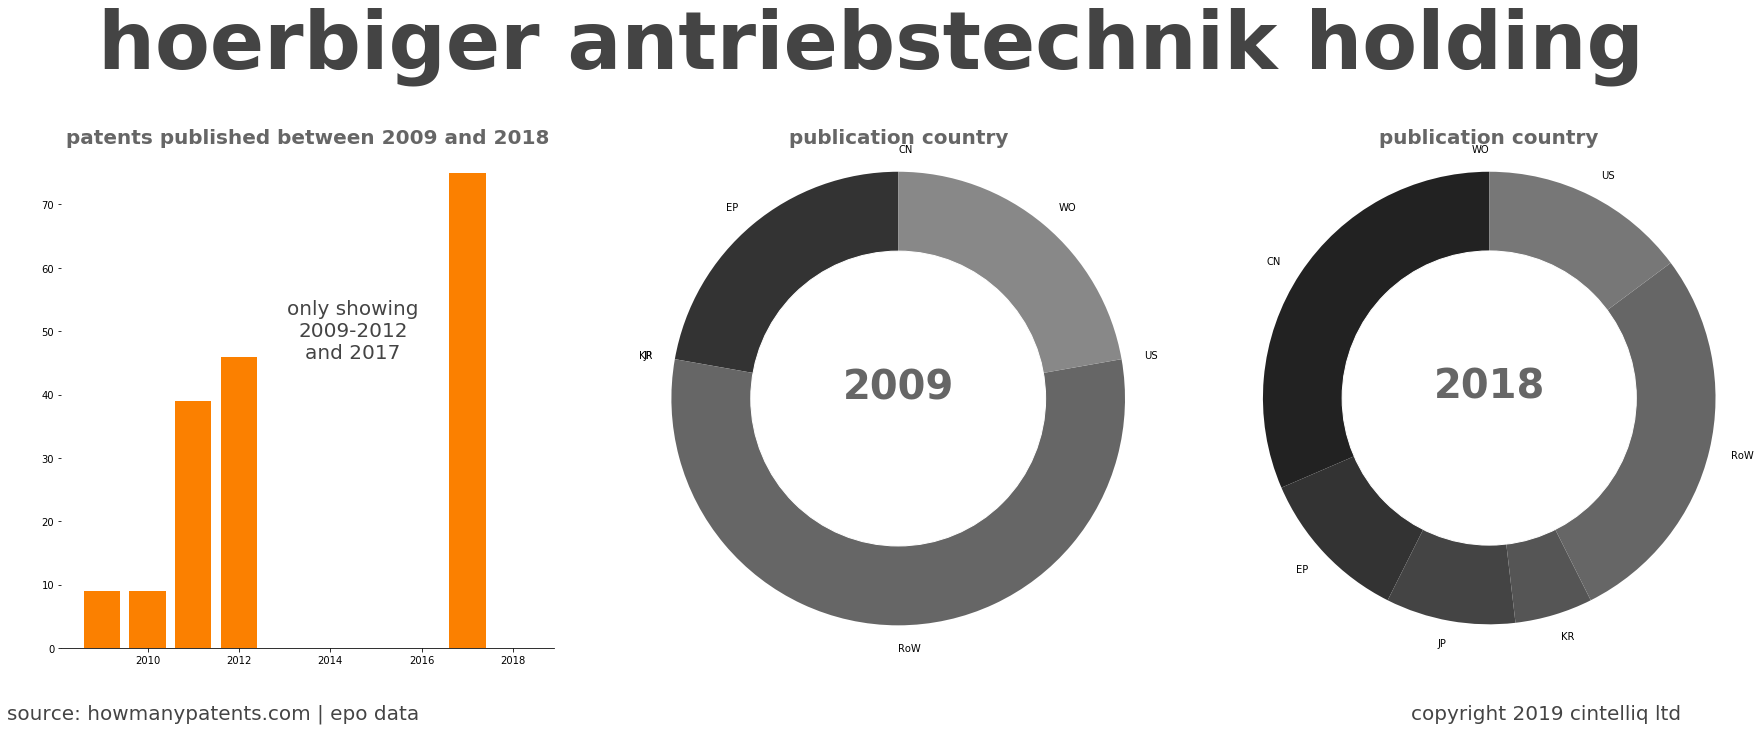 summary of patents for Hoerbiger Antriebstechnik Holding